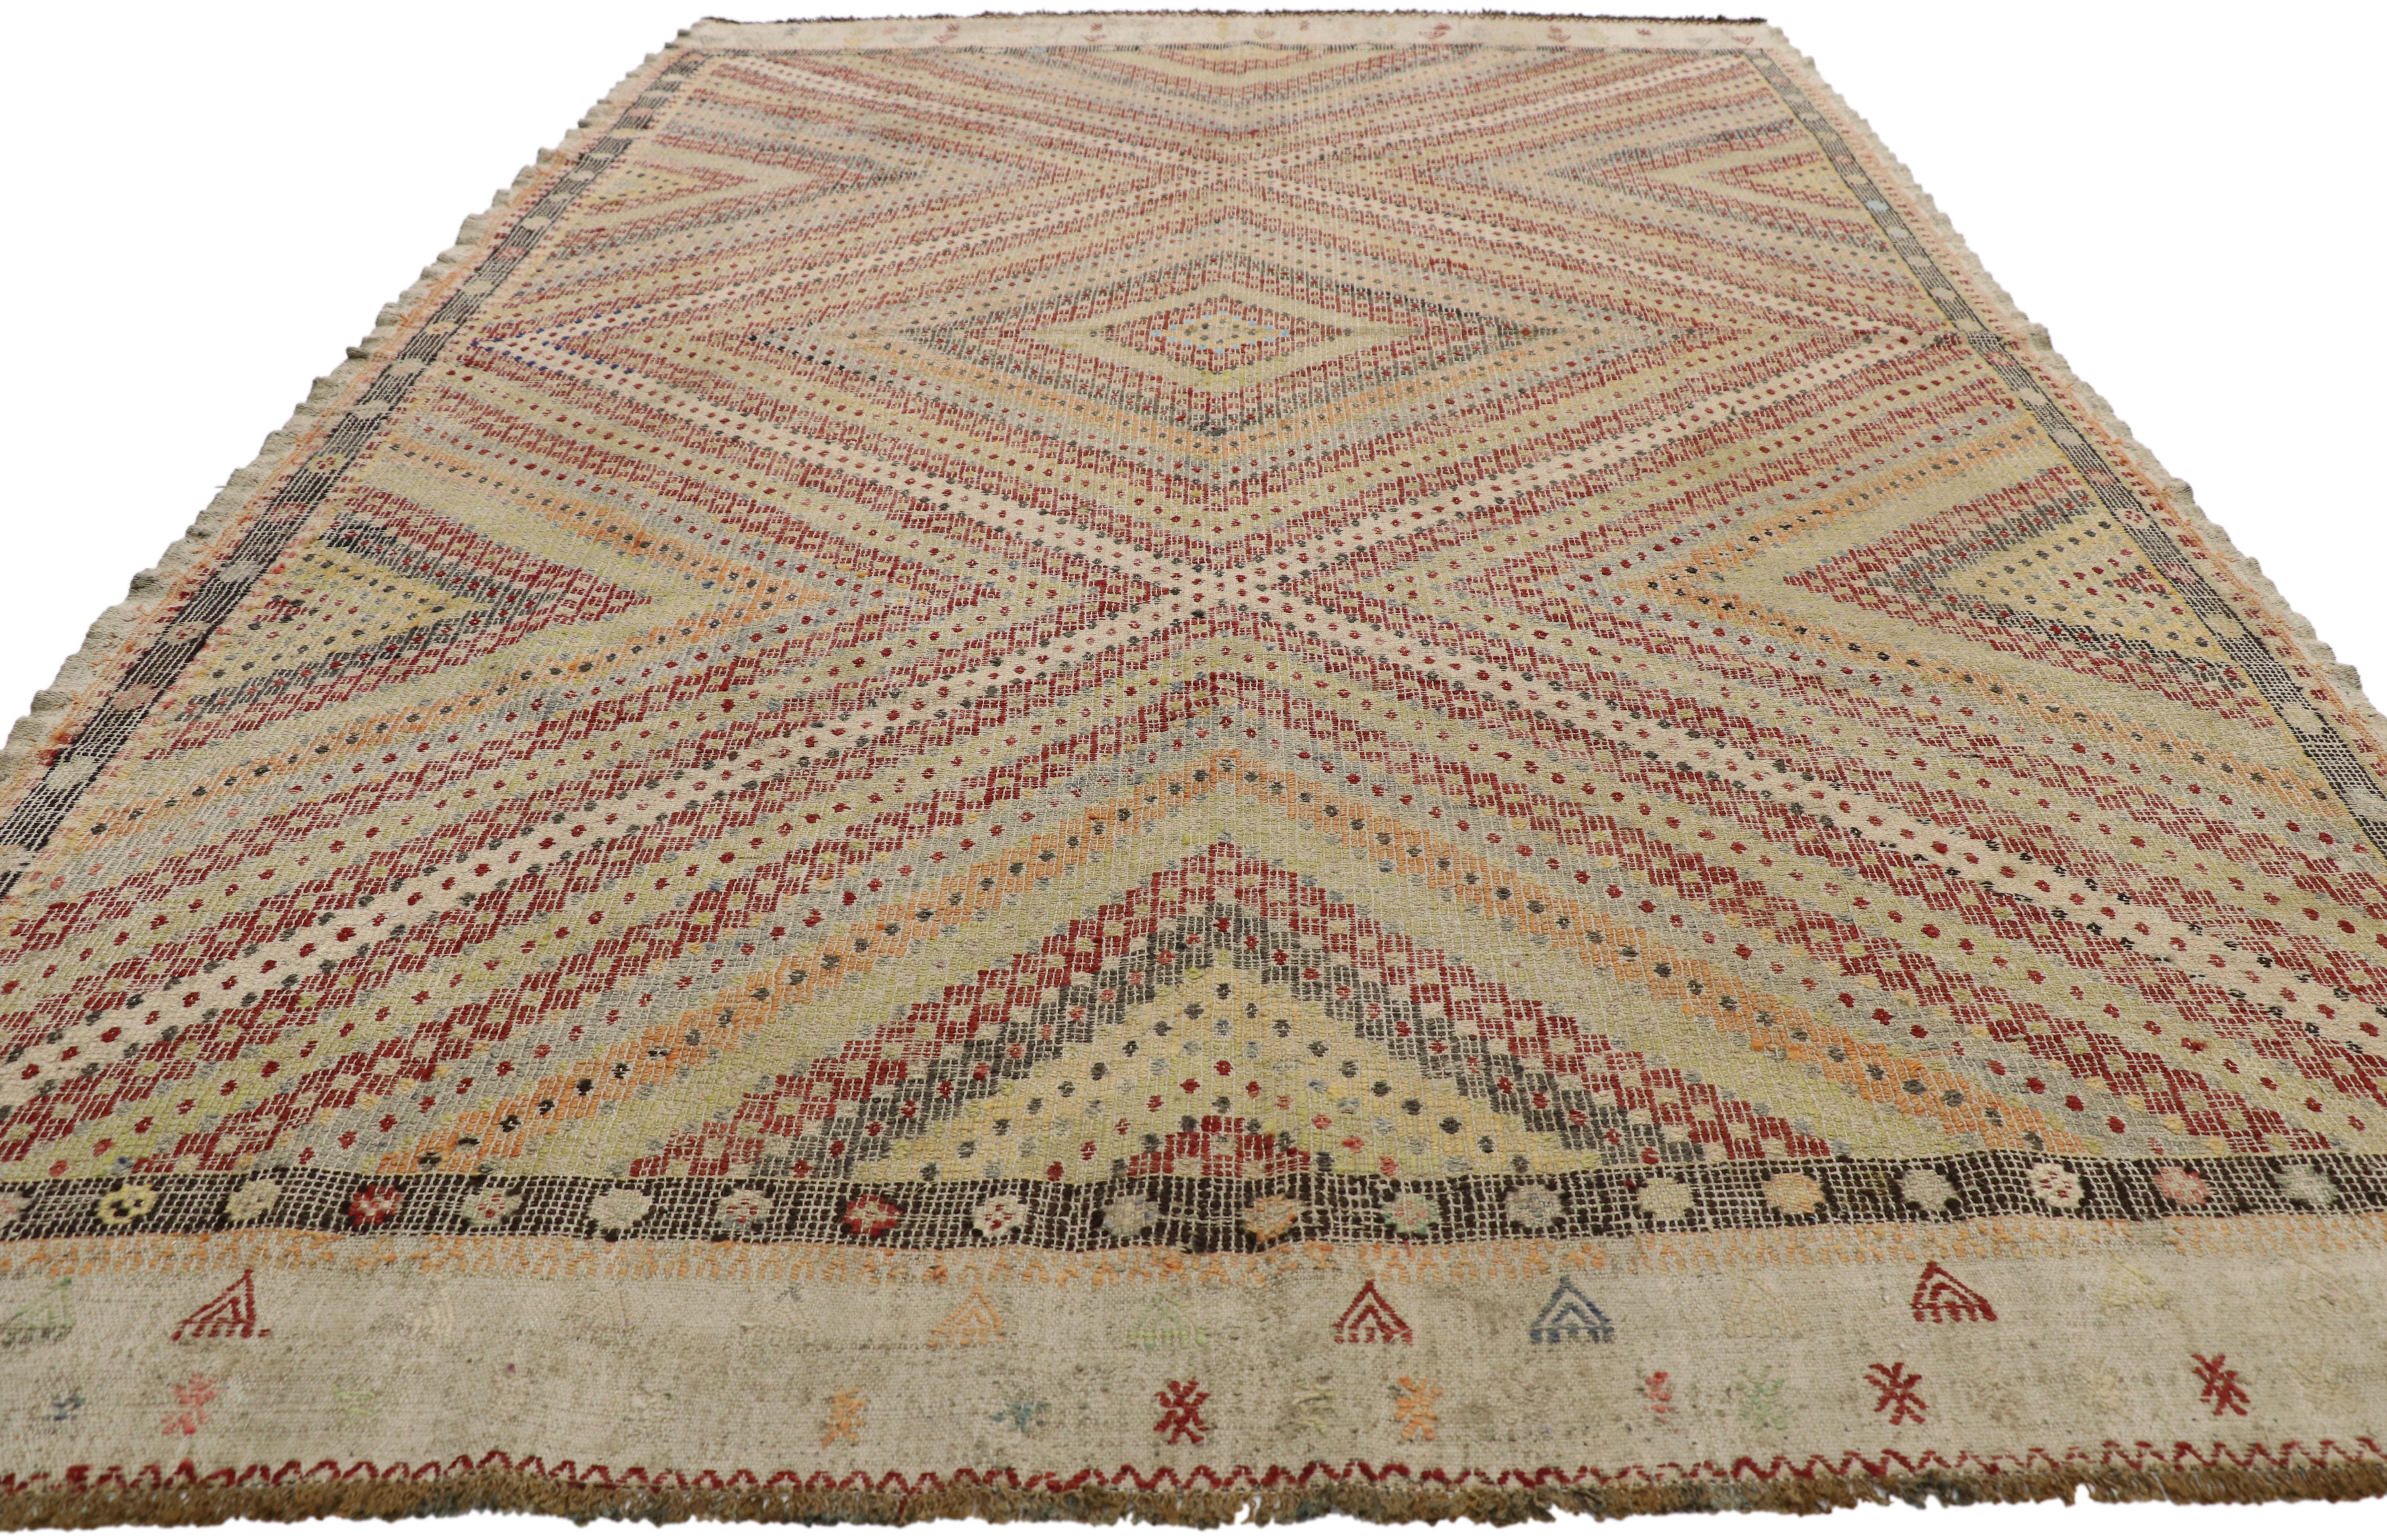 Distressed Vintage Turkish Kilim Rug with Southern Living British Colonial Style For Sale 3